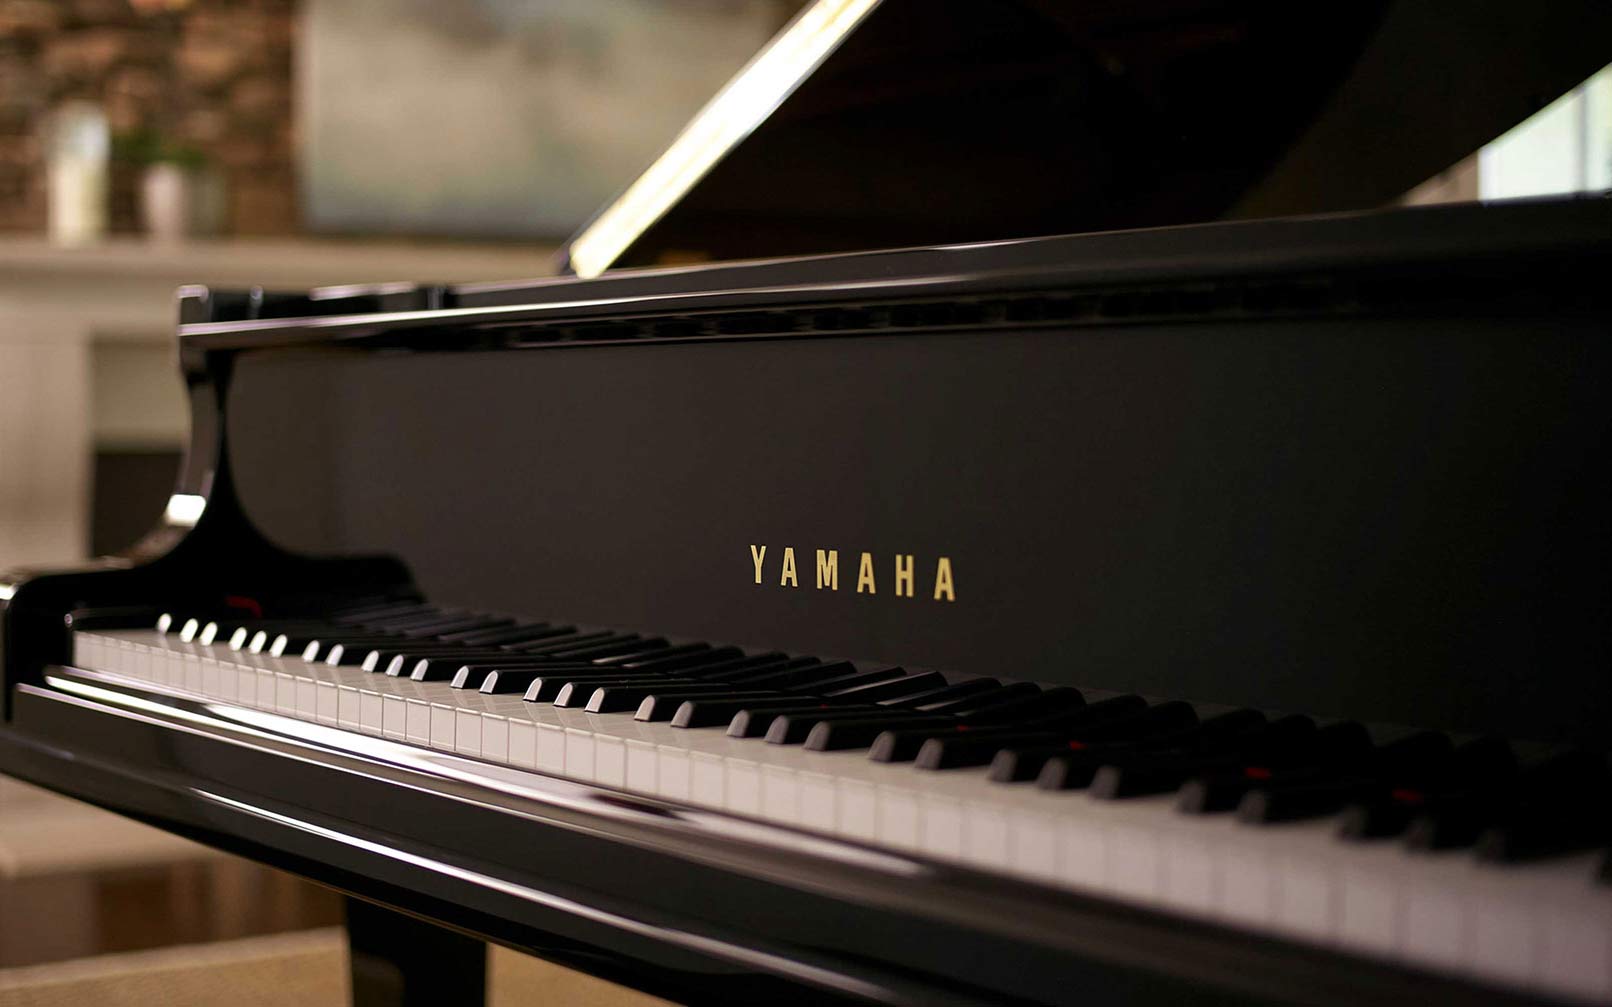  Yamaha piano with open lid showcasing its state of the art keys and frame